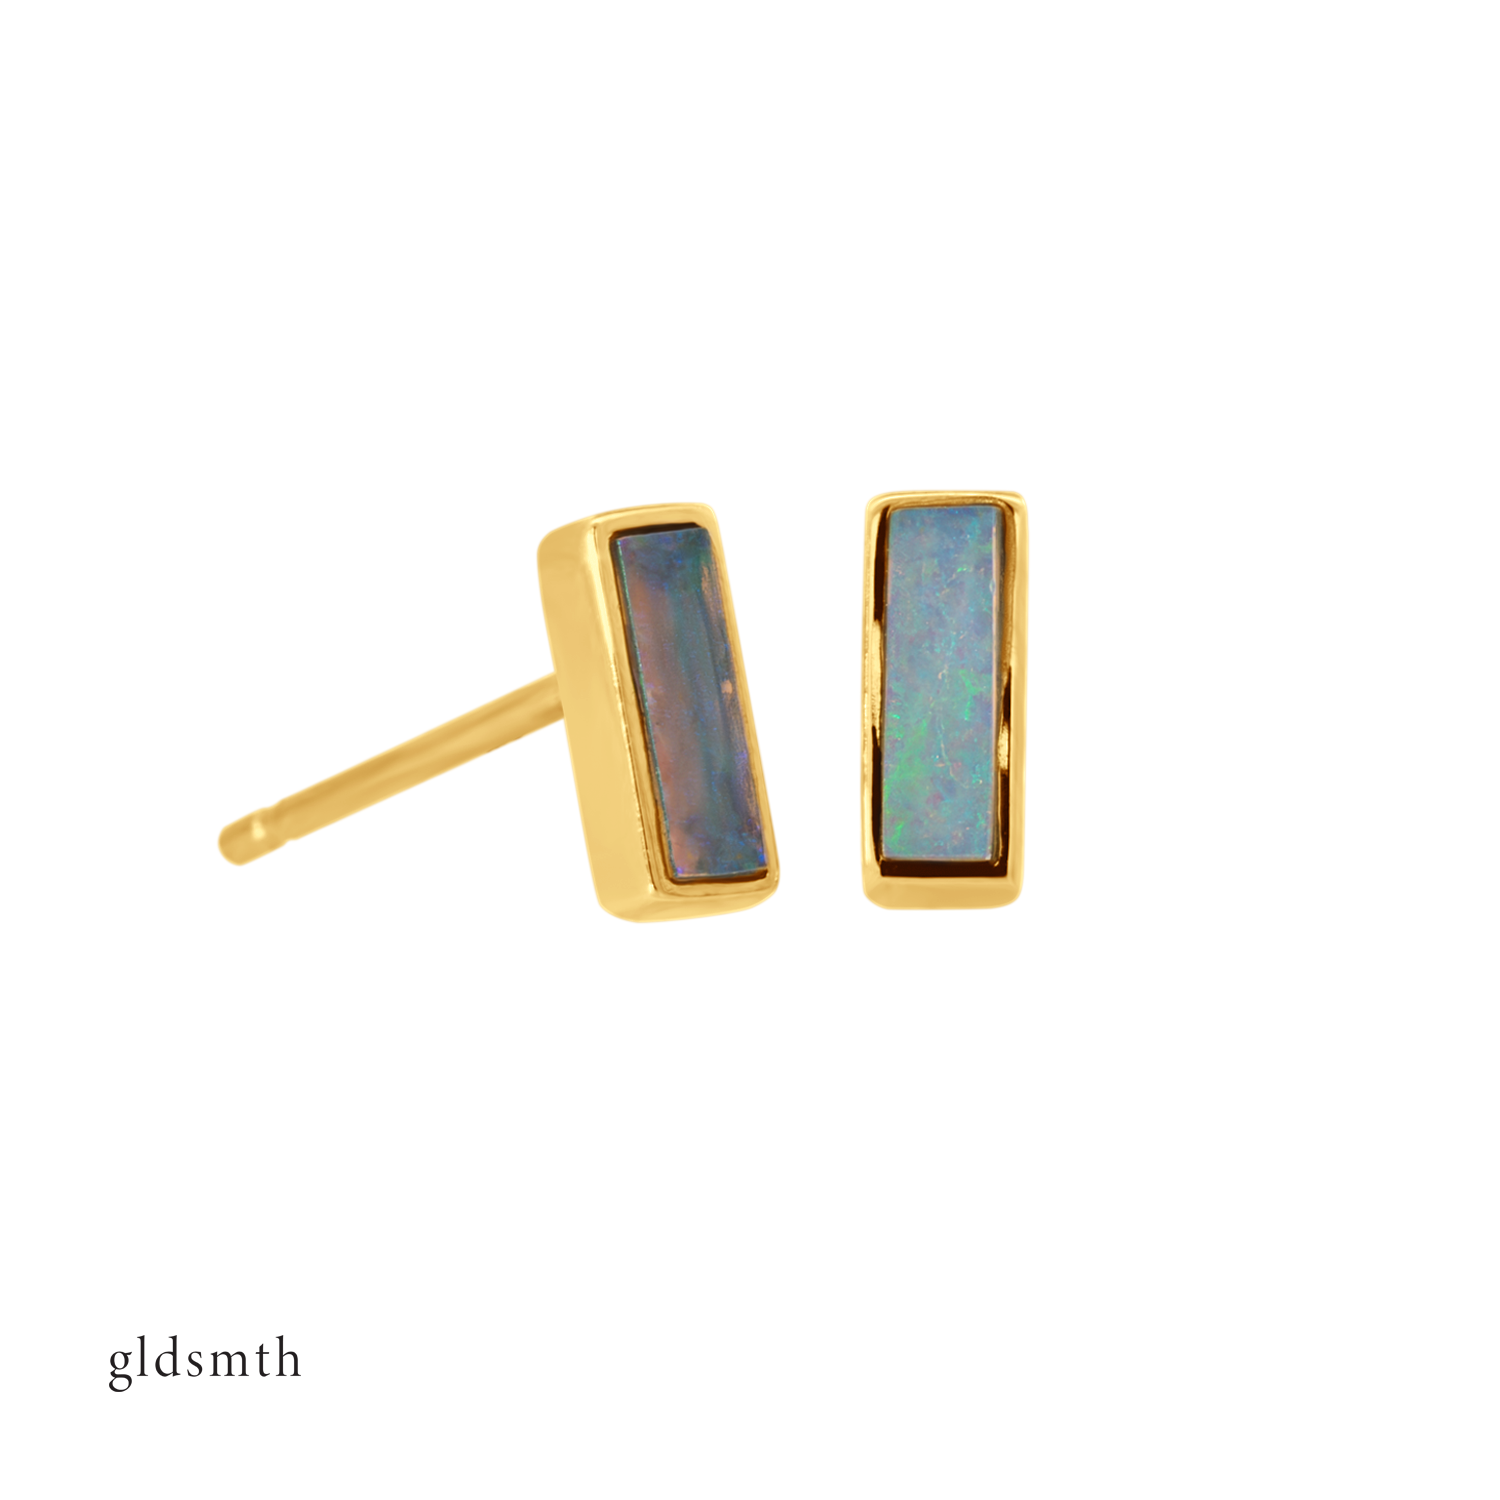 Fine and dainty studs. Solid yellow gold earrings set with opals